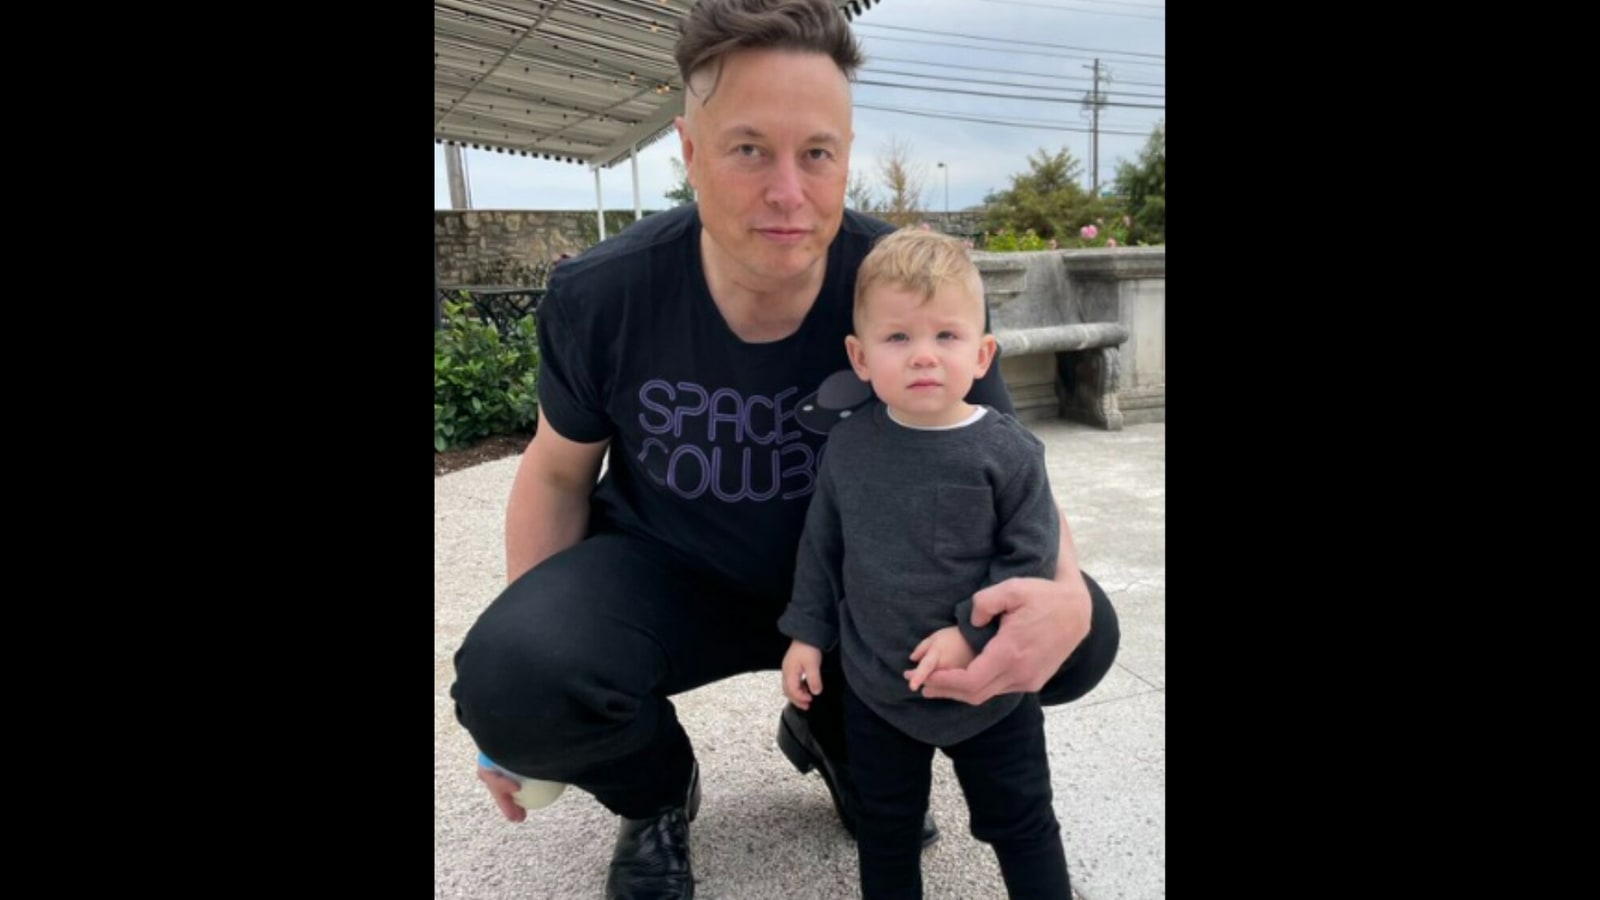 Elon Musk Brought 2-Year-Old Son to Tense Twitter Meetings: Report